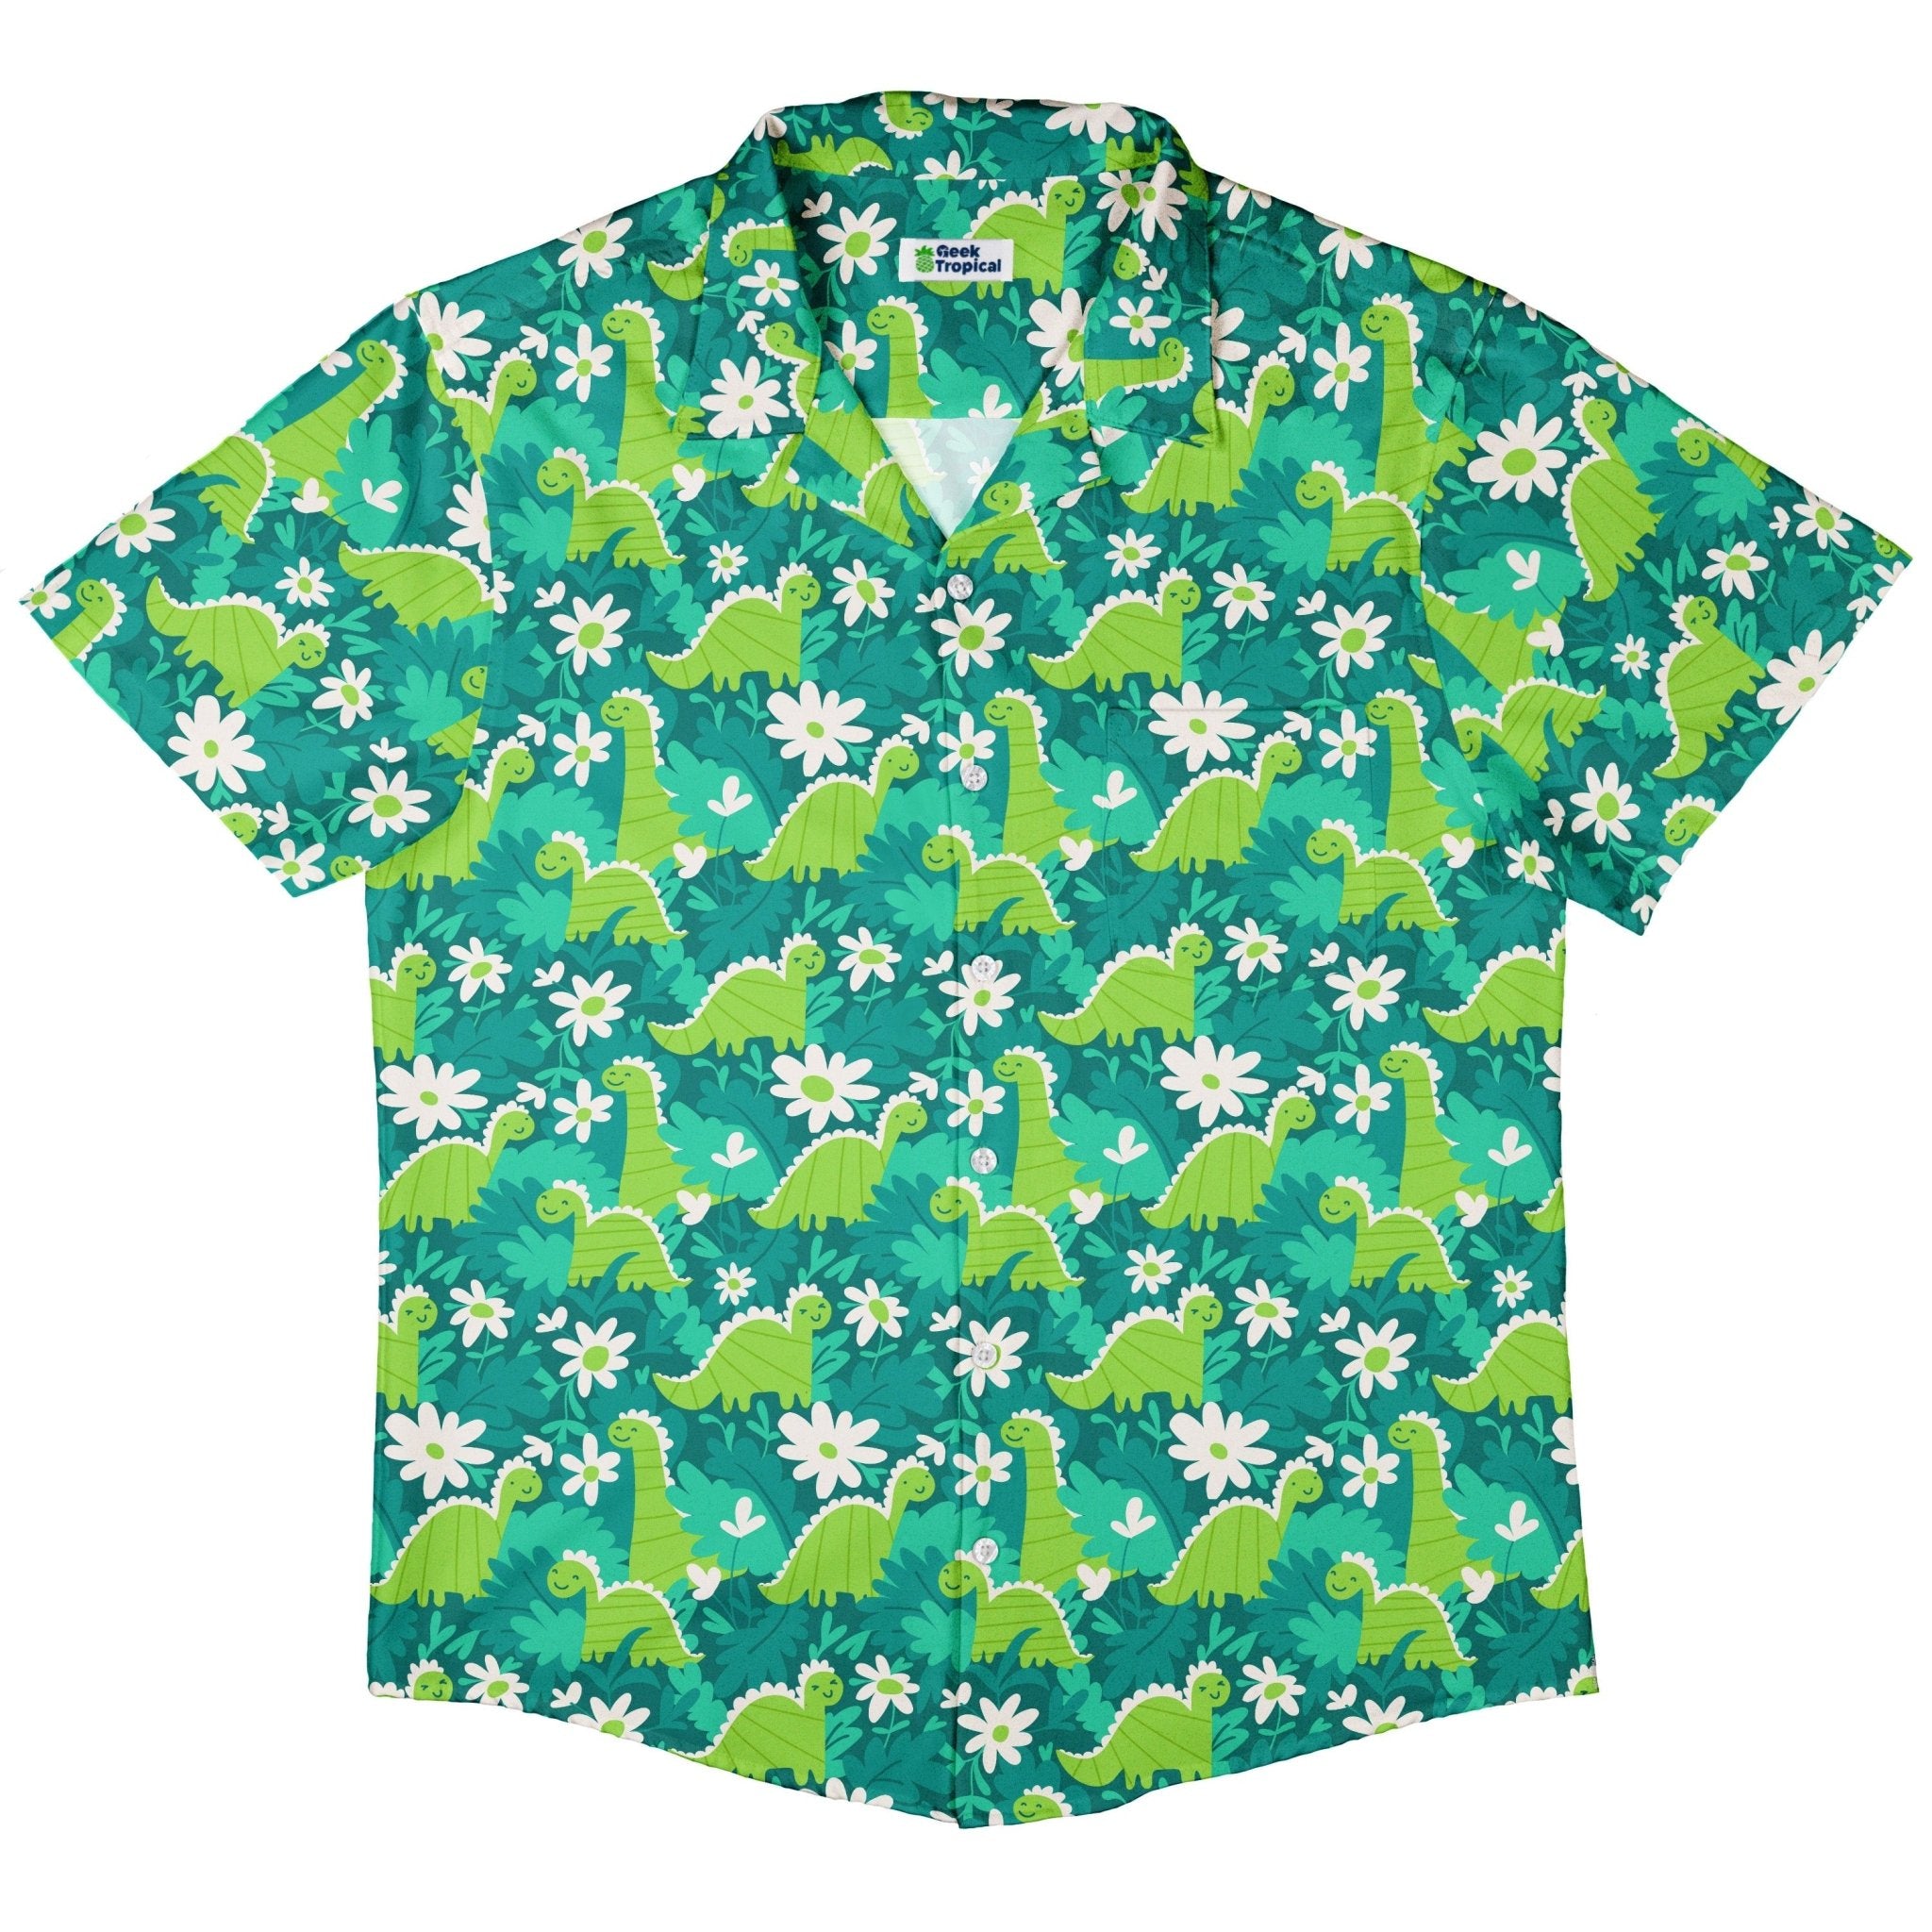 Dinosaur Smiles Flowers and Leaves Button Up Shirt - adult sizing - dinosaur print - Maximalist Patterns